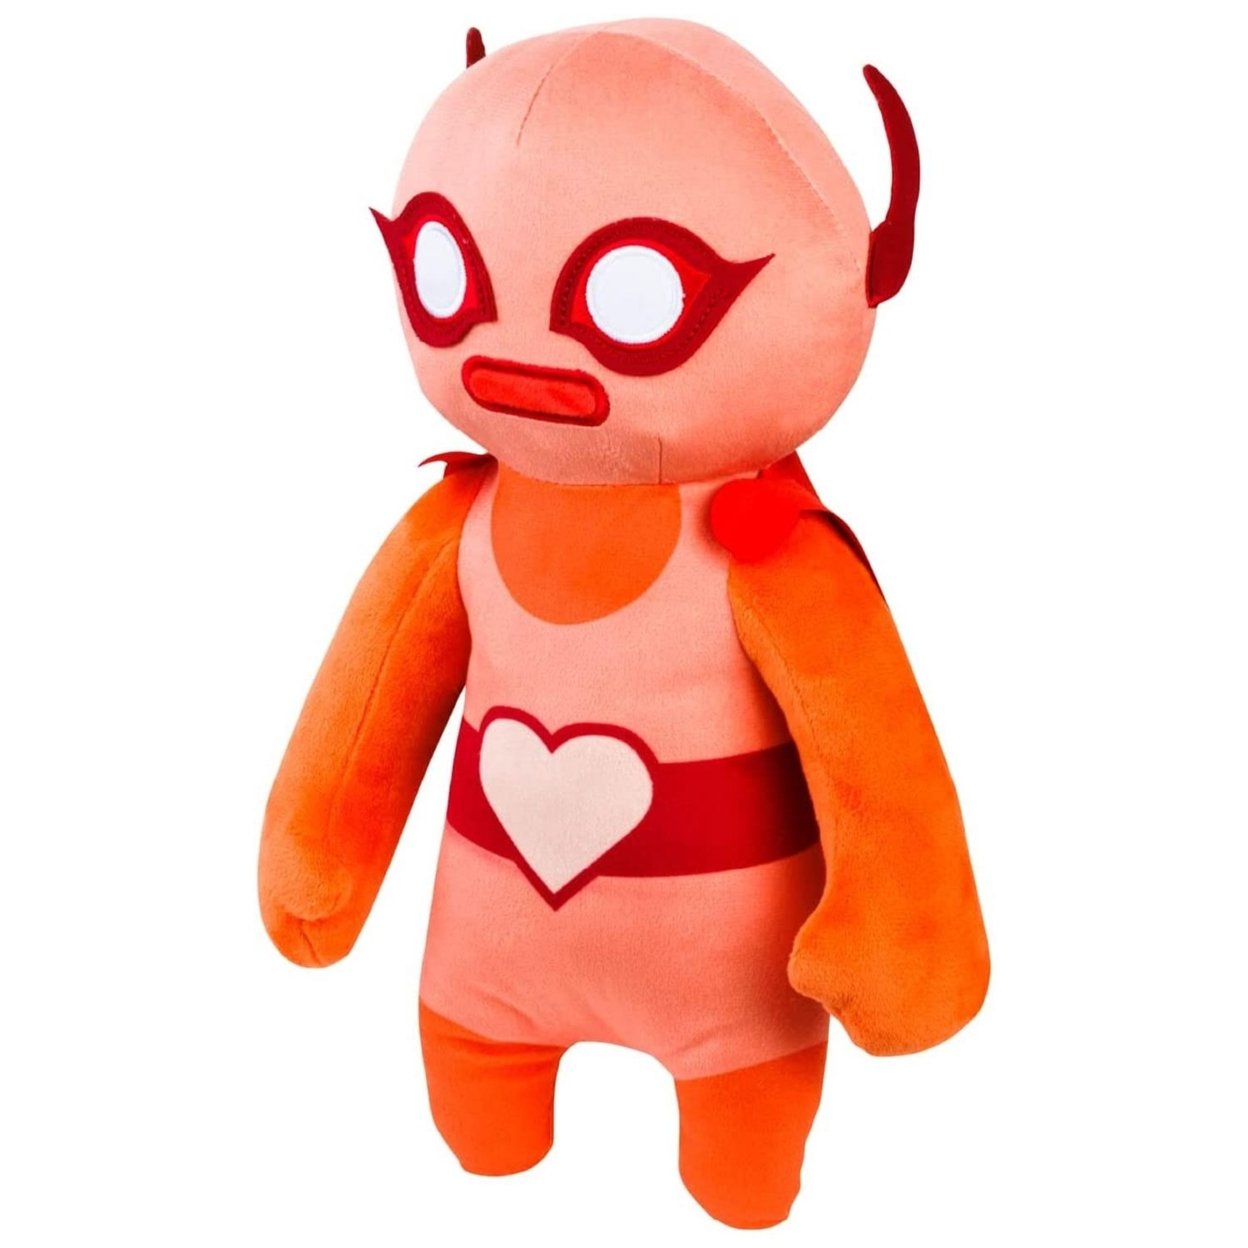 Gang Beasts Red Wrestler Plush 12 Video Game Character Doll Figure PMI International